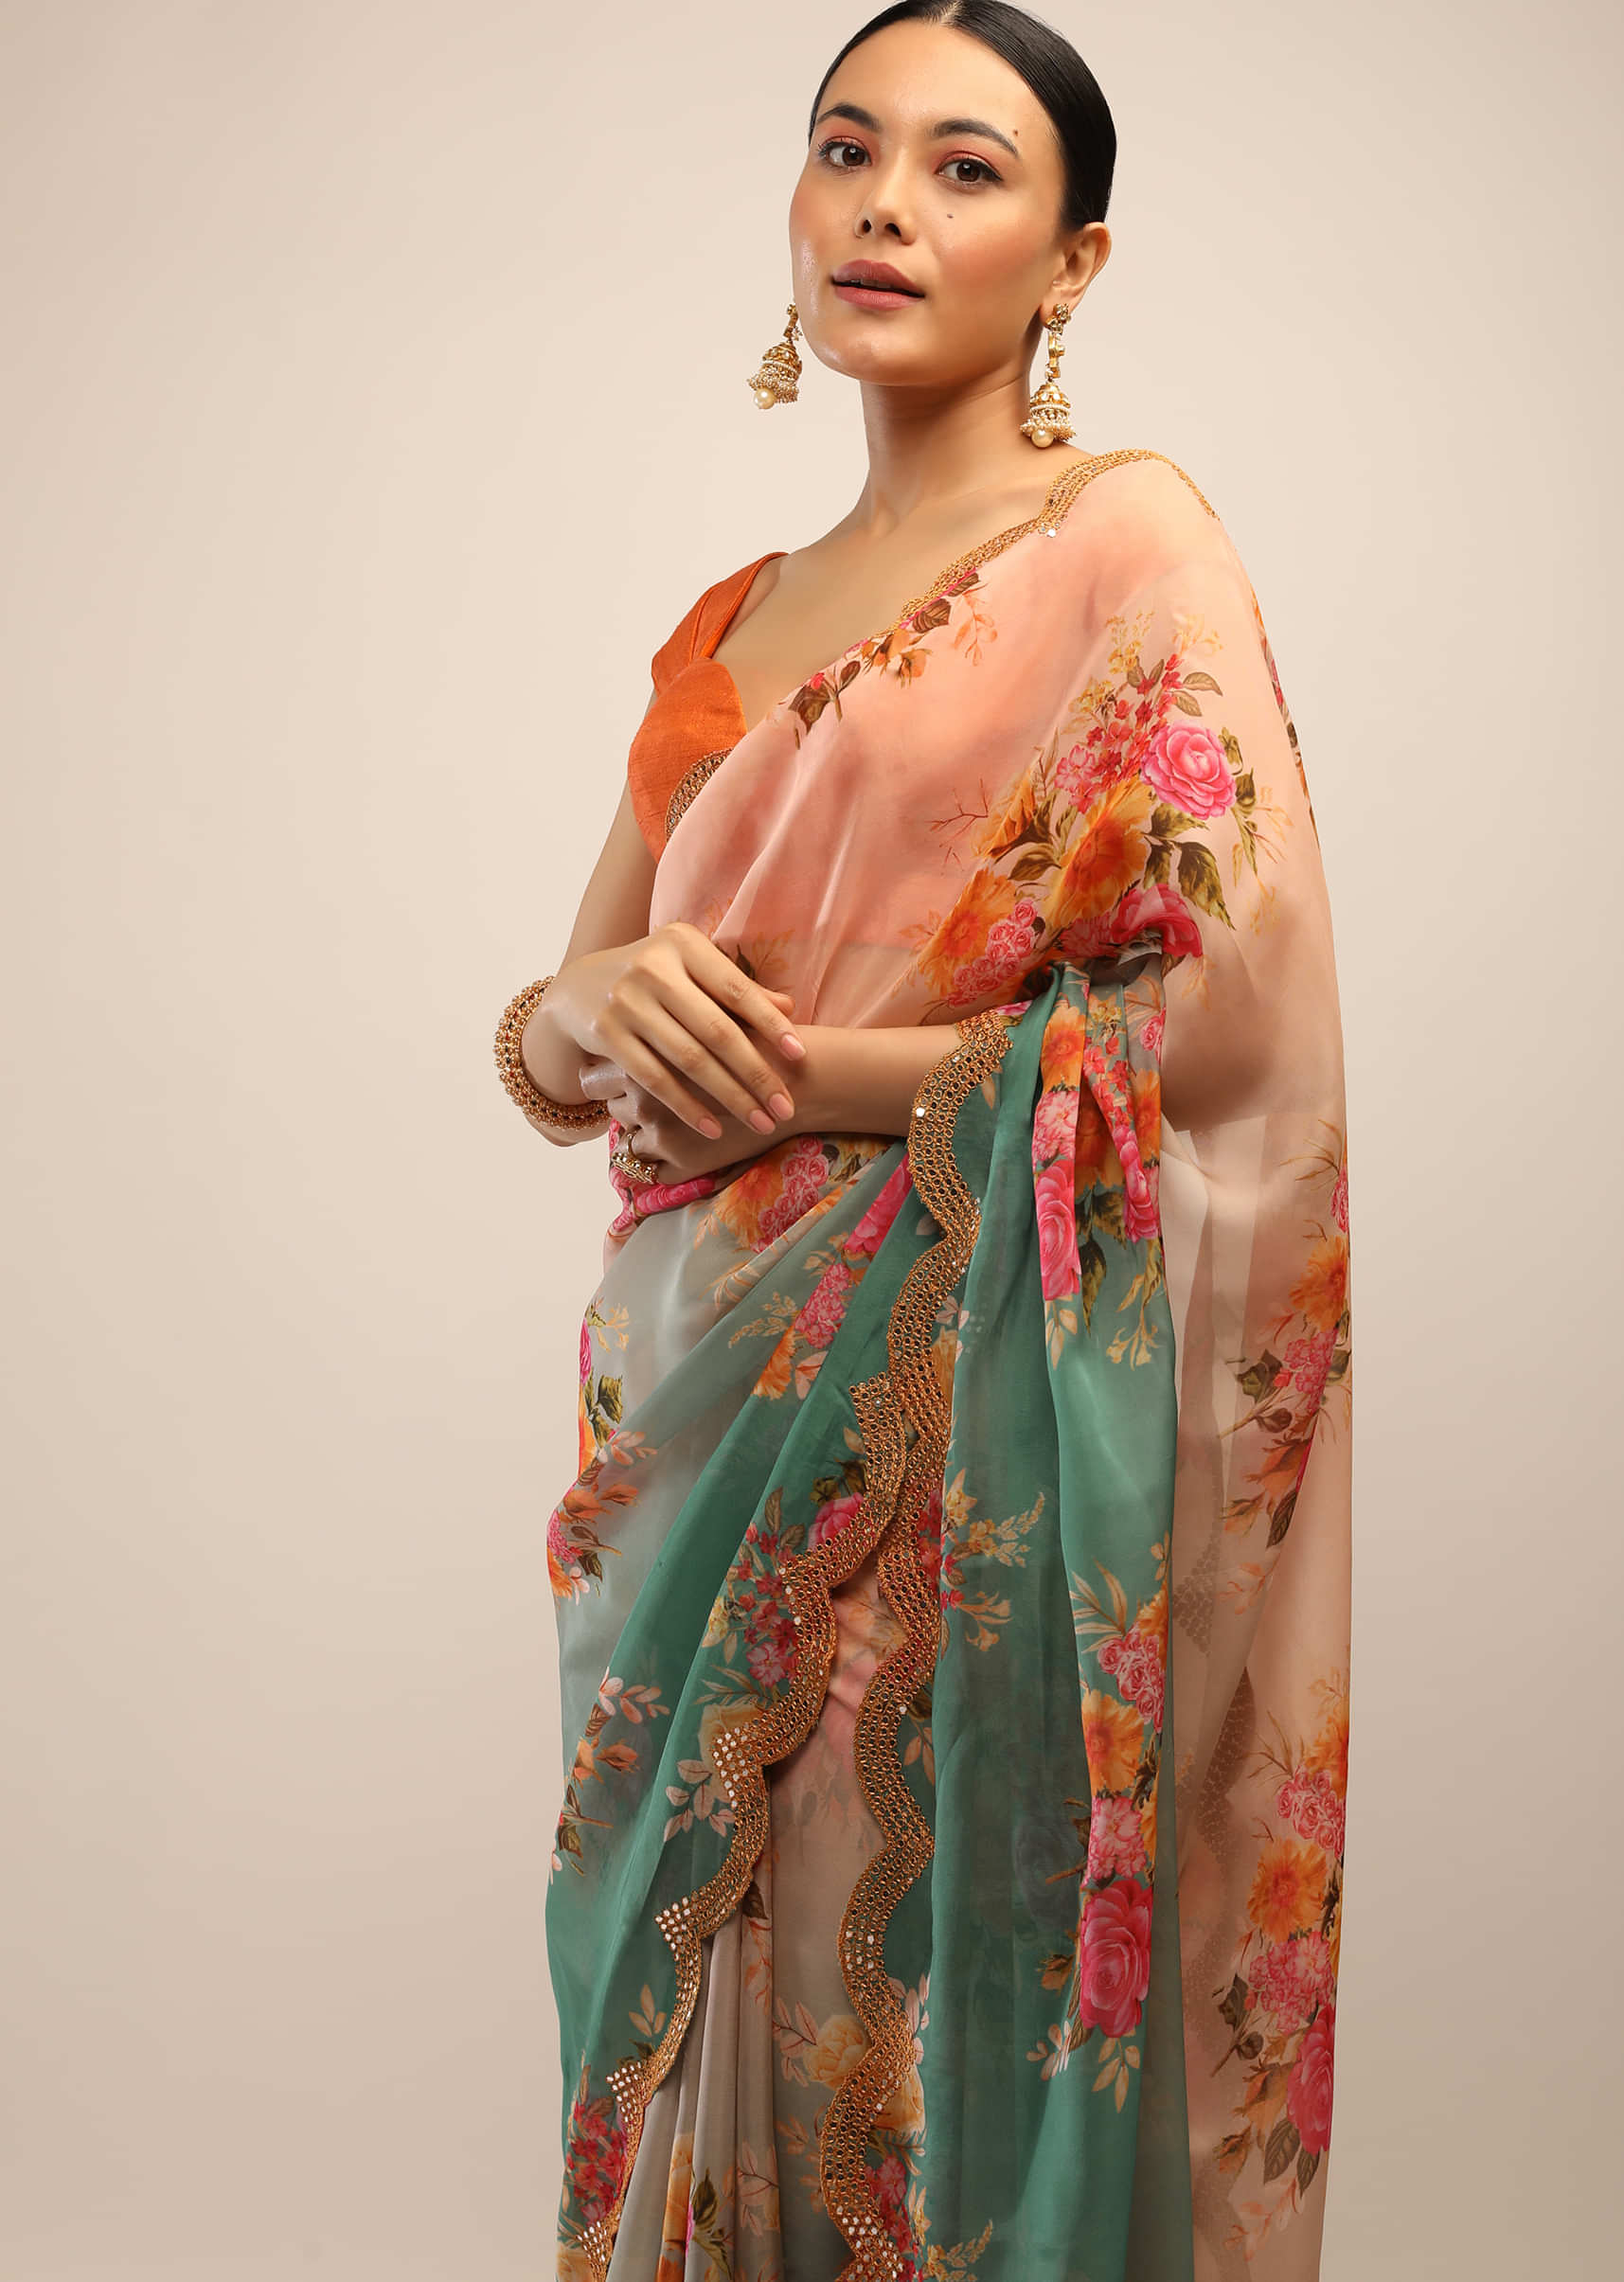 Jade Green And Peach Ombre Saree In Organza With Multi Colored Floral Print And Mirror Embellished Border